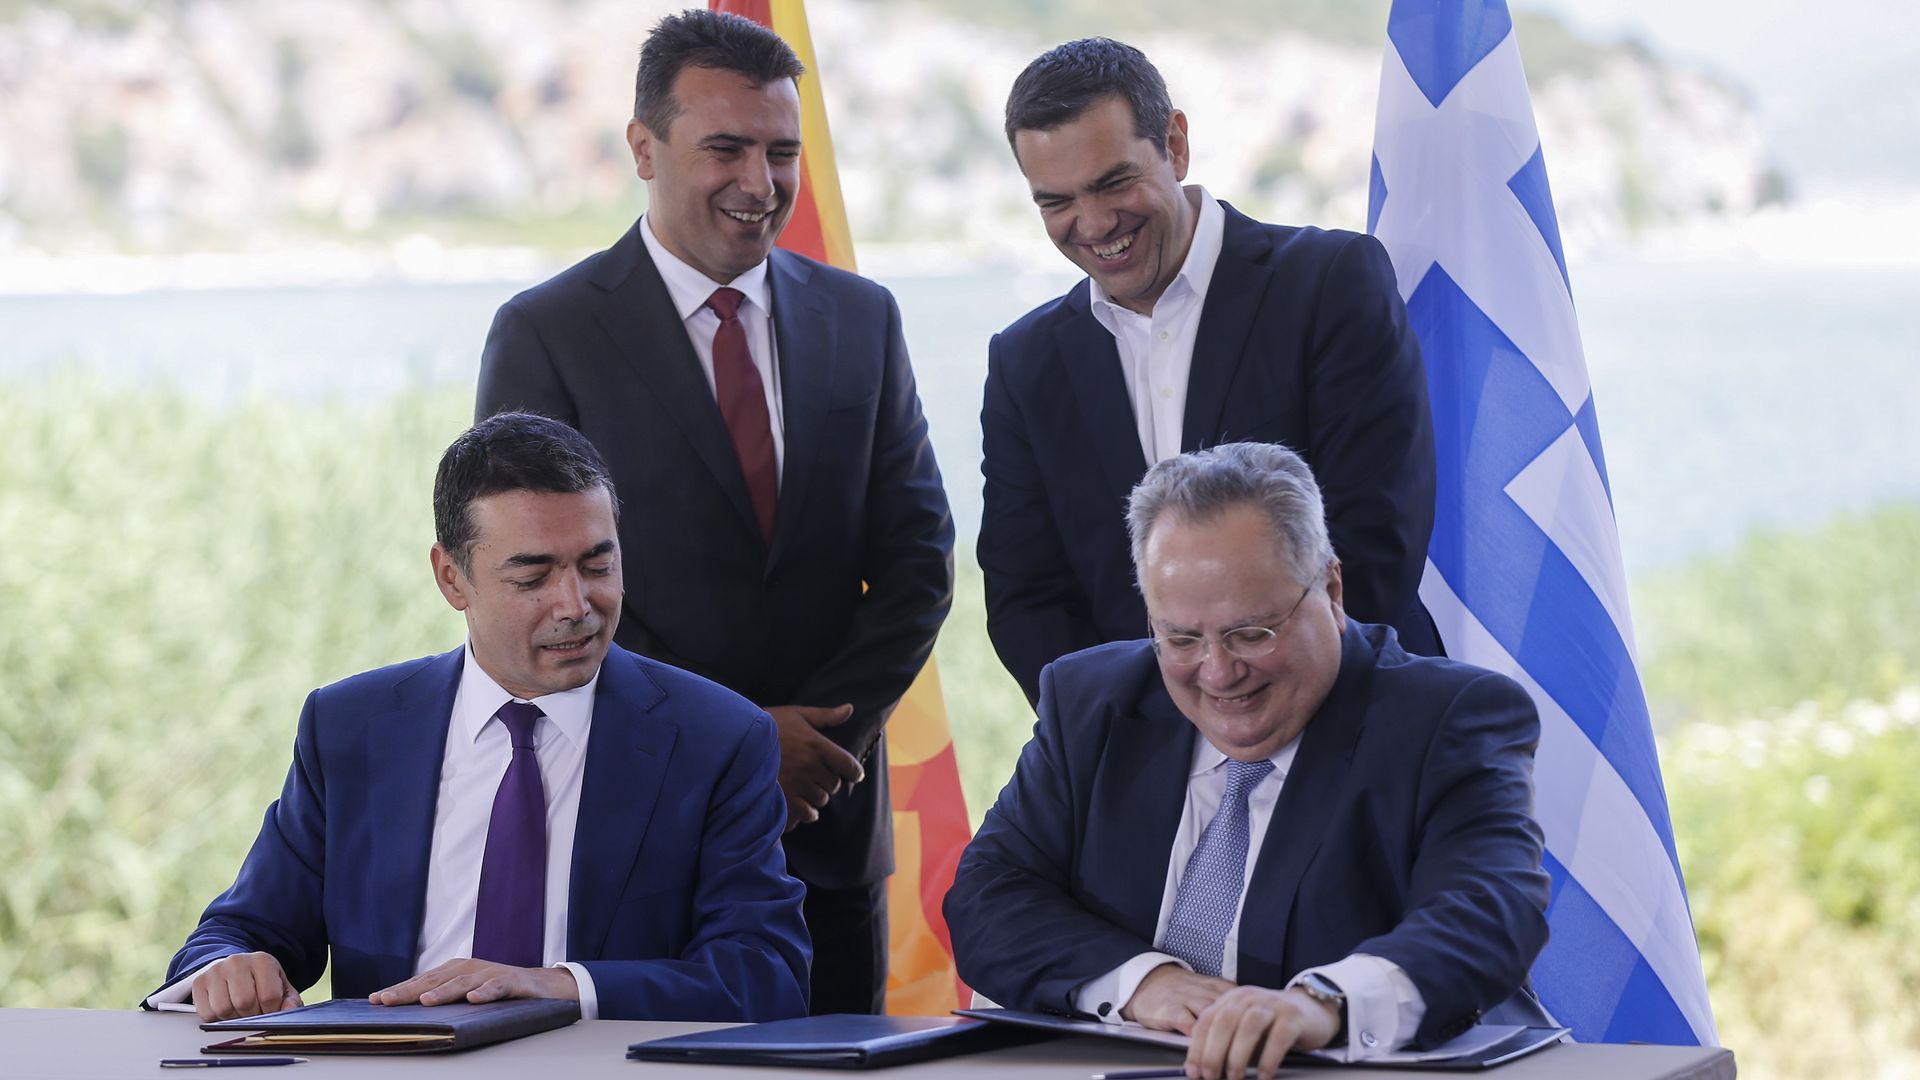 Greek Prime Minister Alexis Tsipras (back R) and Macedonian Prime Minister Zoran Zaev (back L) during the signing ceremony on Sunday.